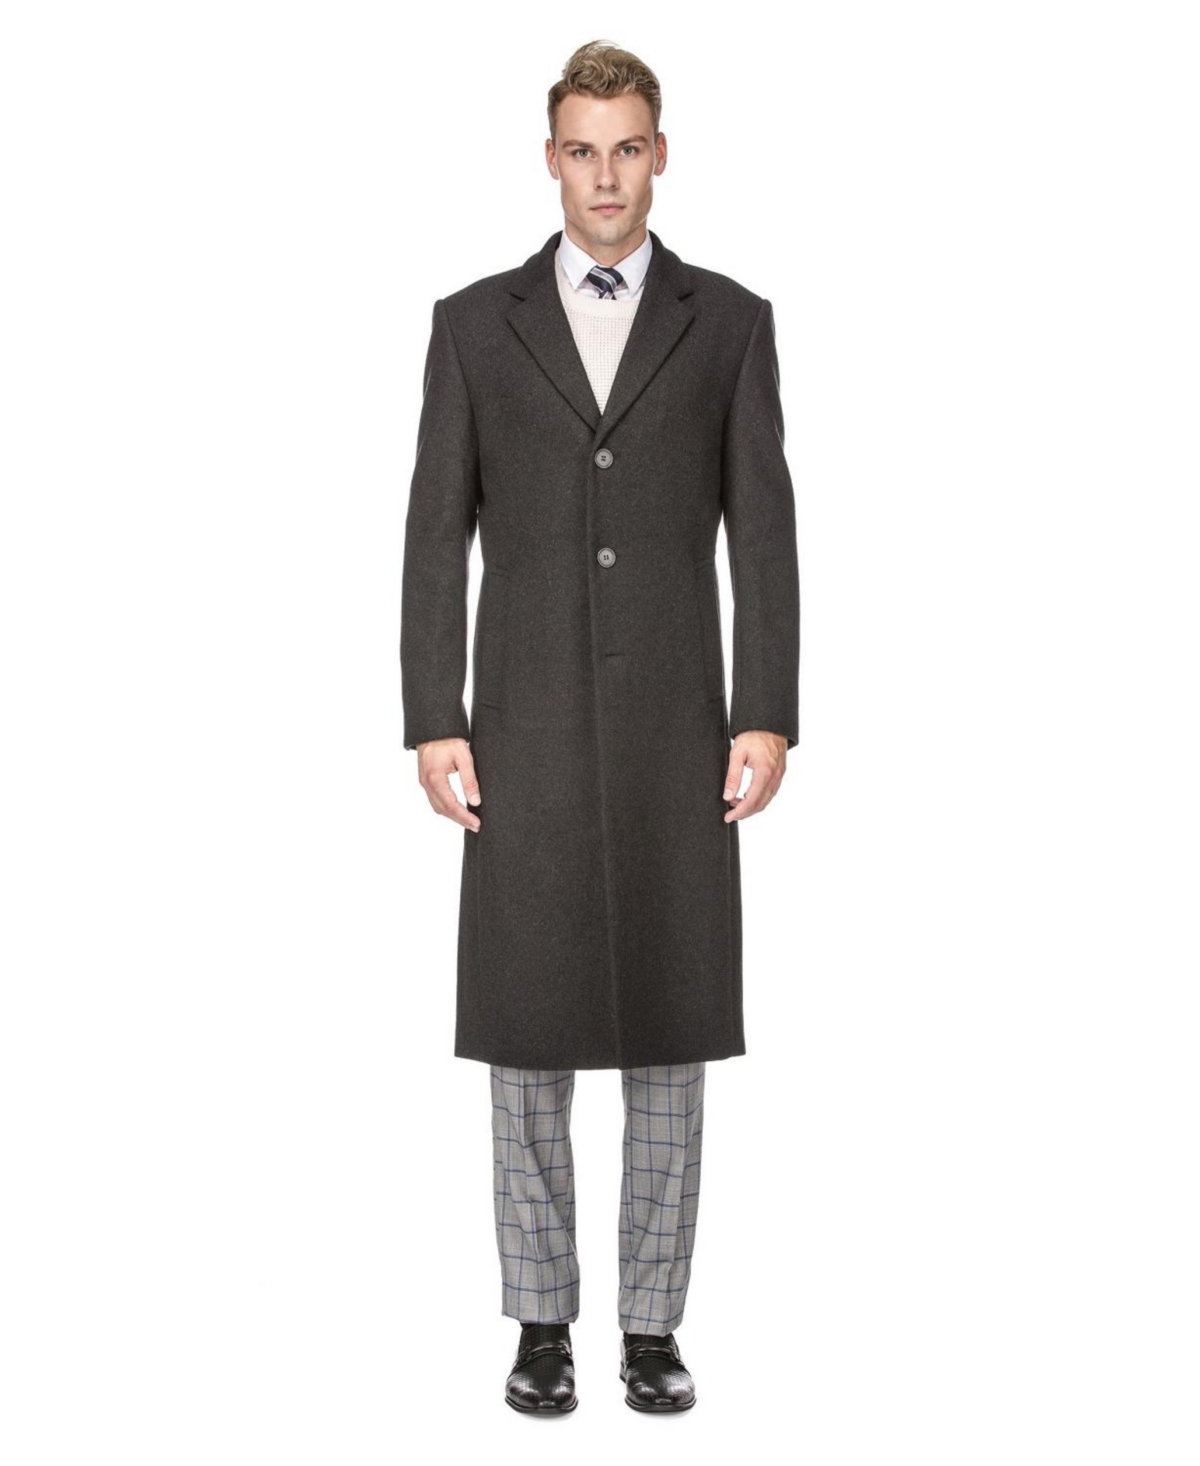  Wool Coat Men with Hood 3 Button Suit Long Sleeve